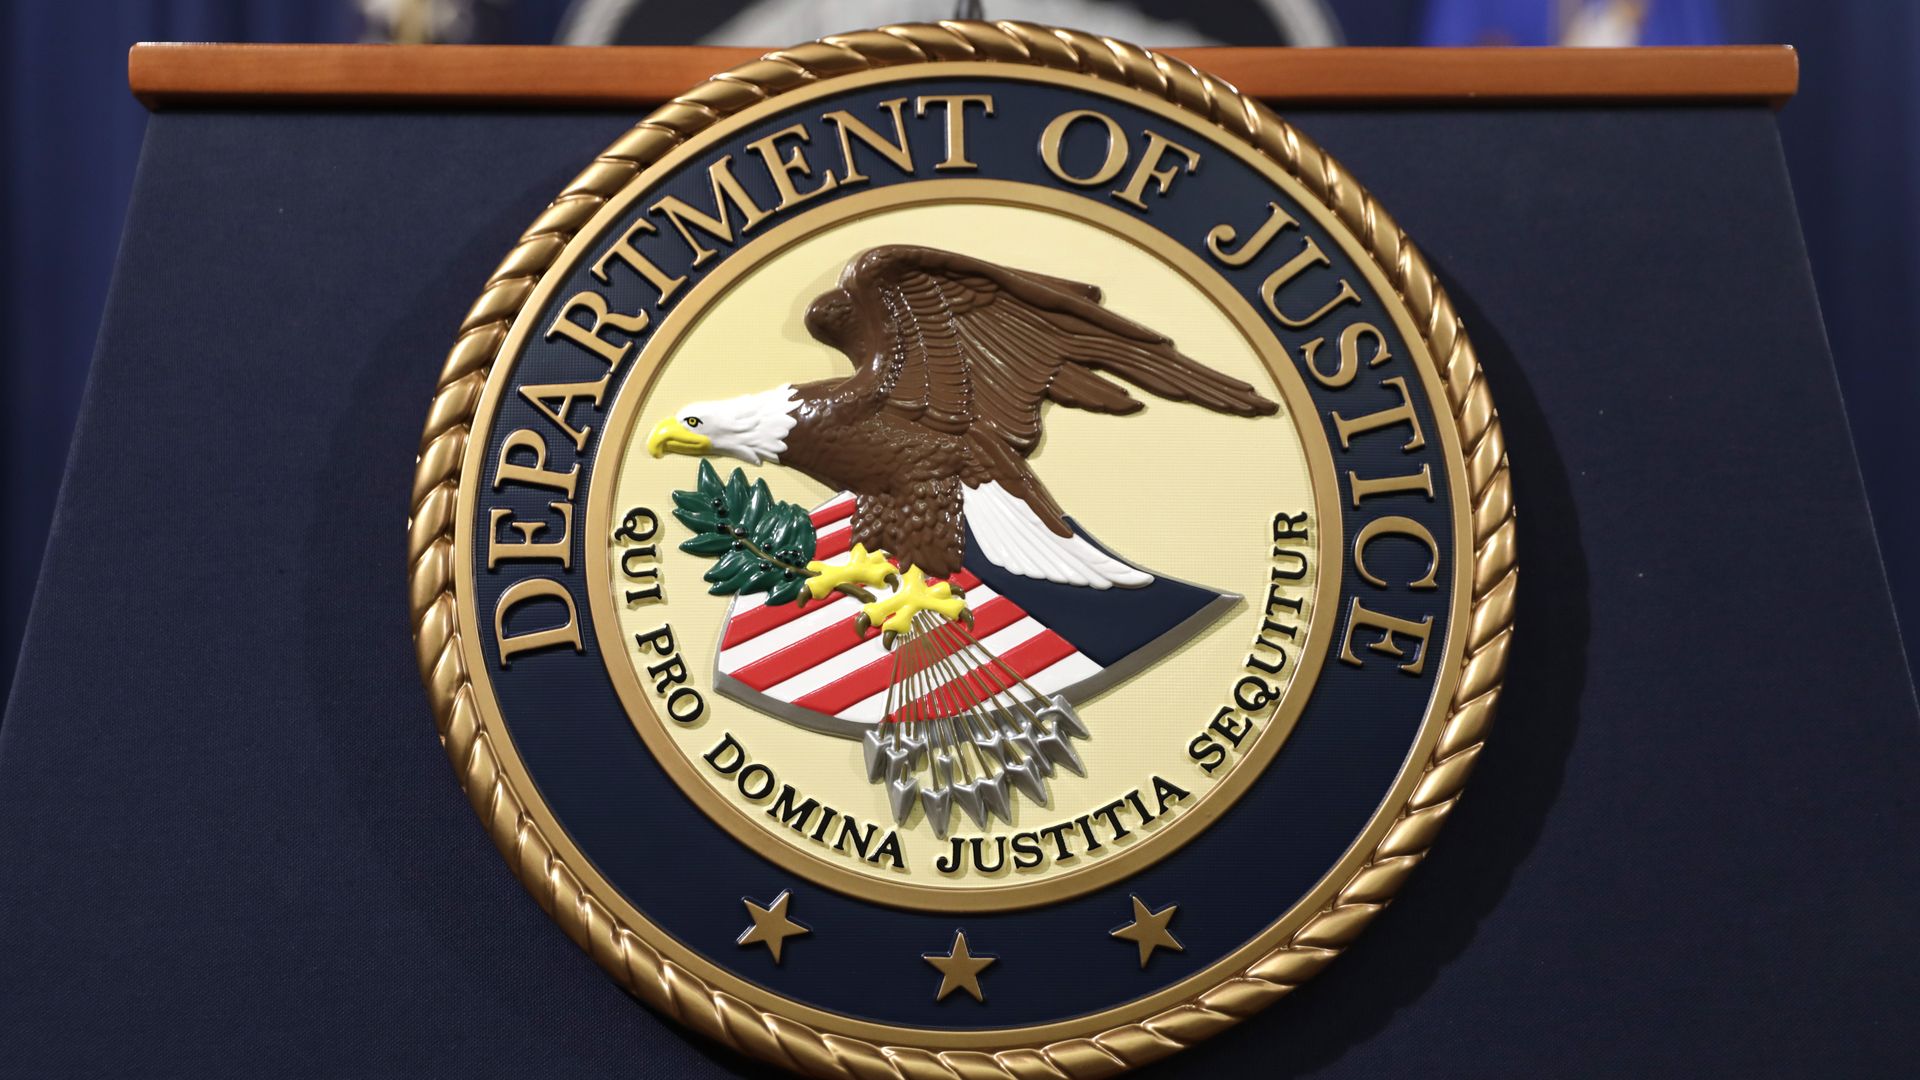 Photo of the DOJ seal with an eagle on it